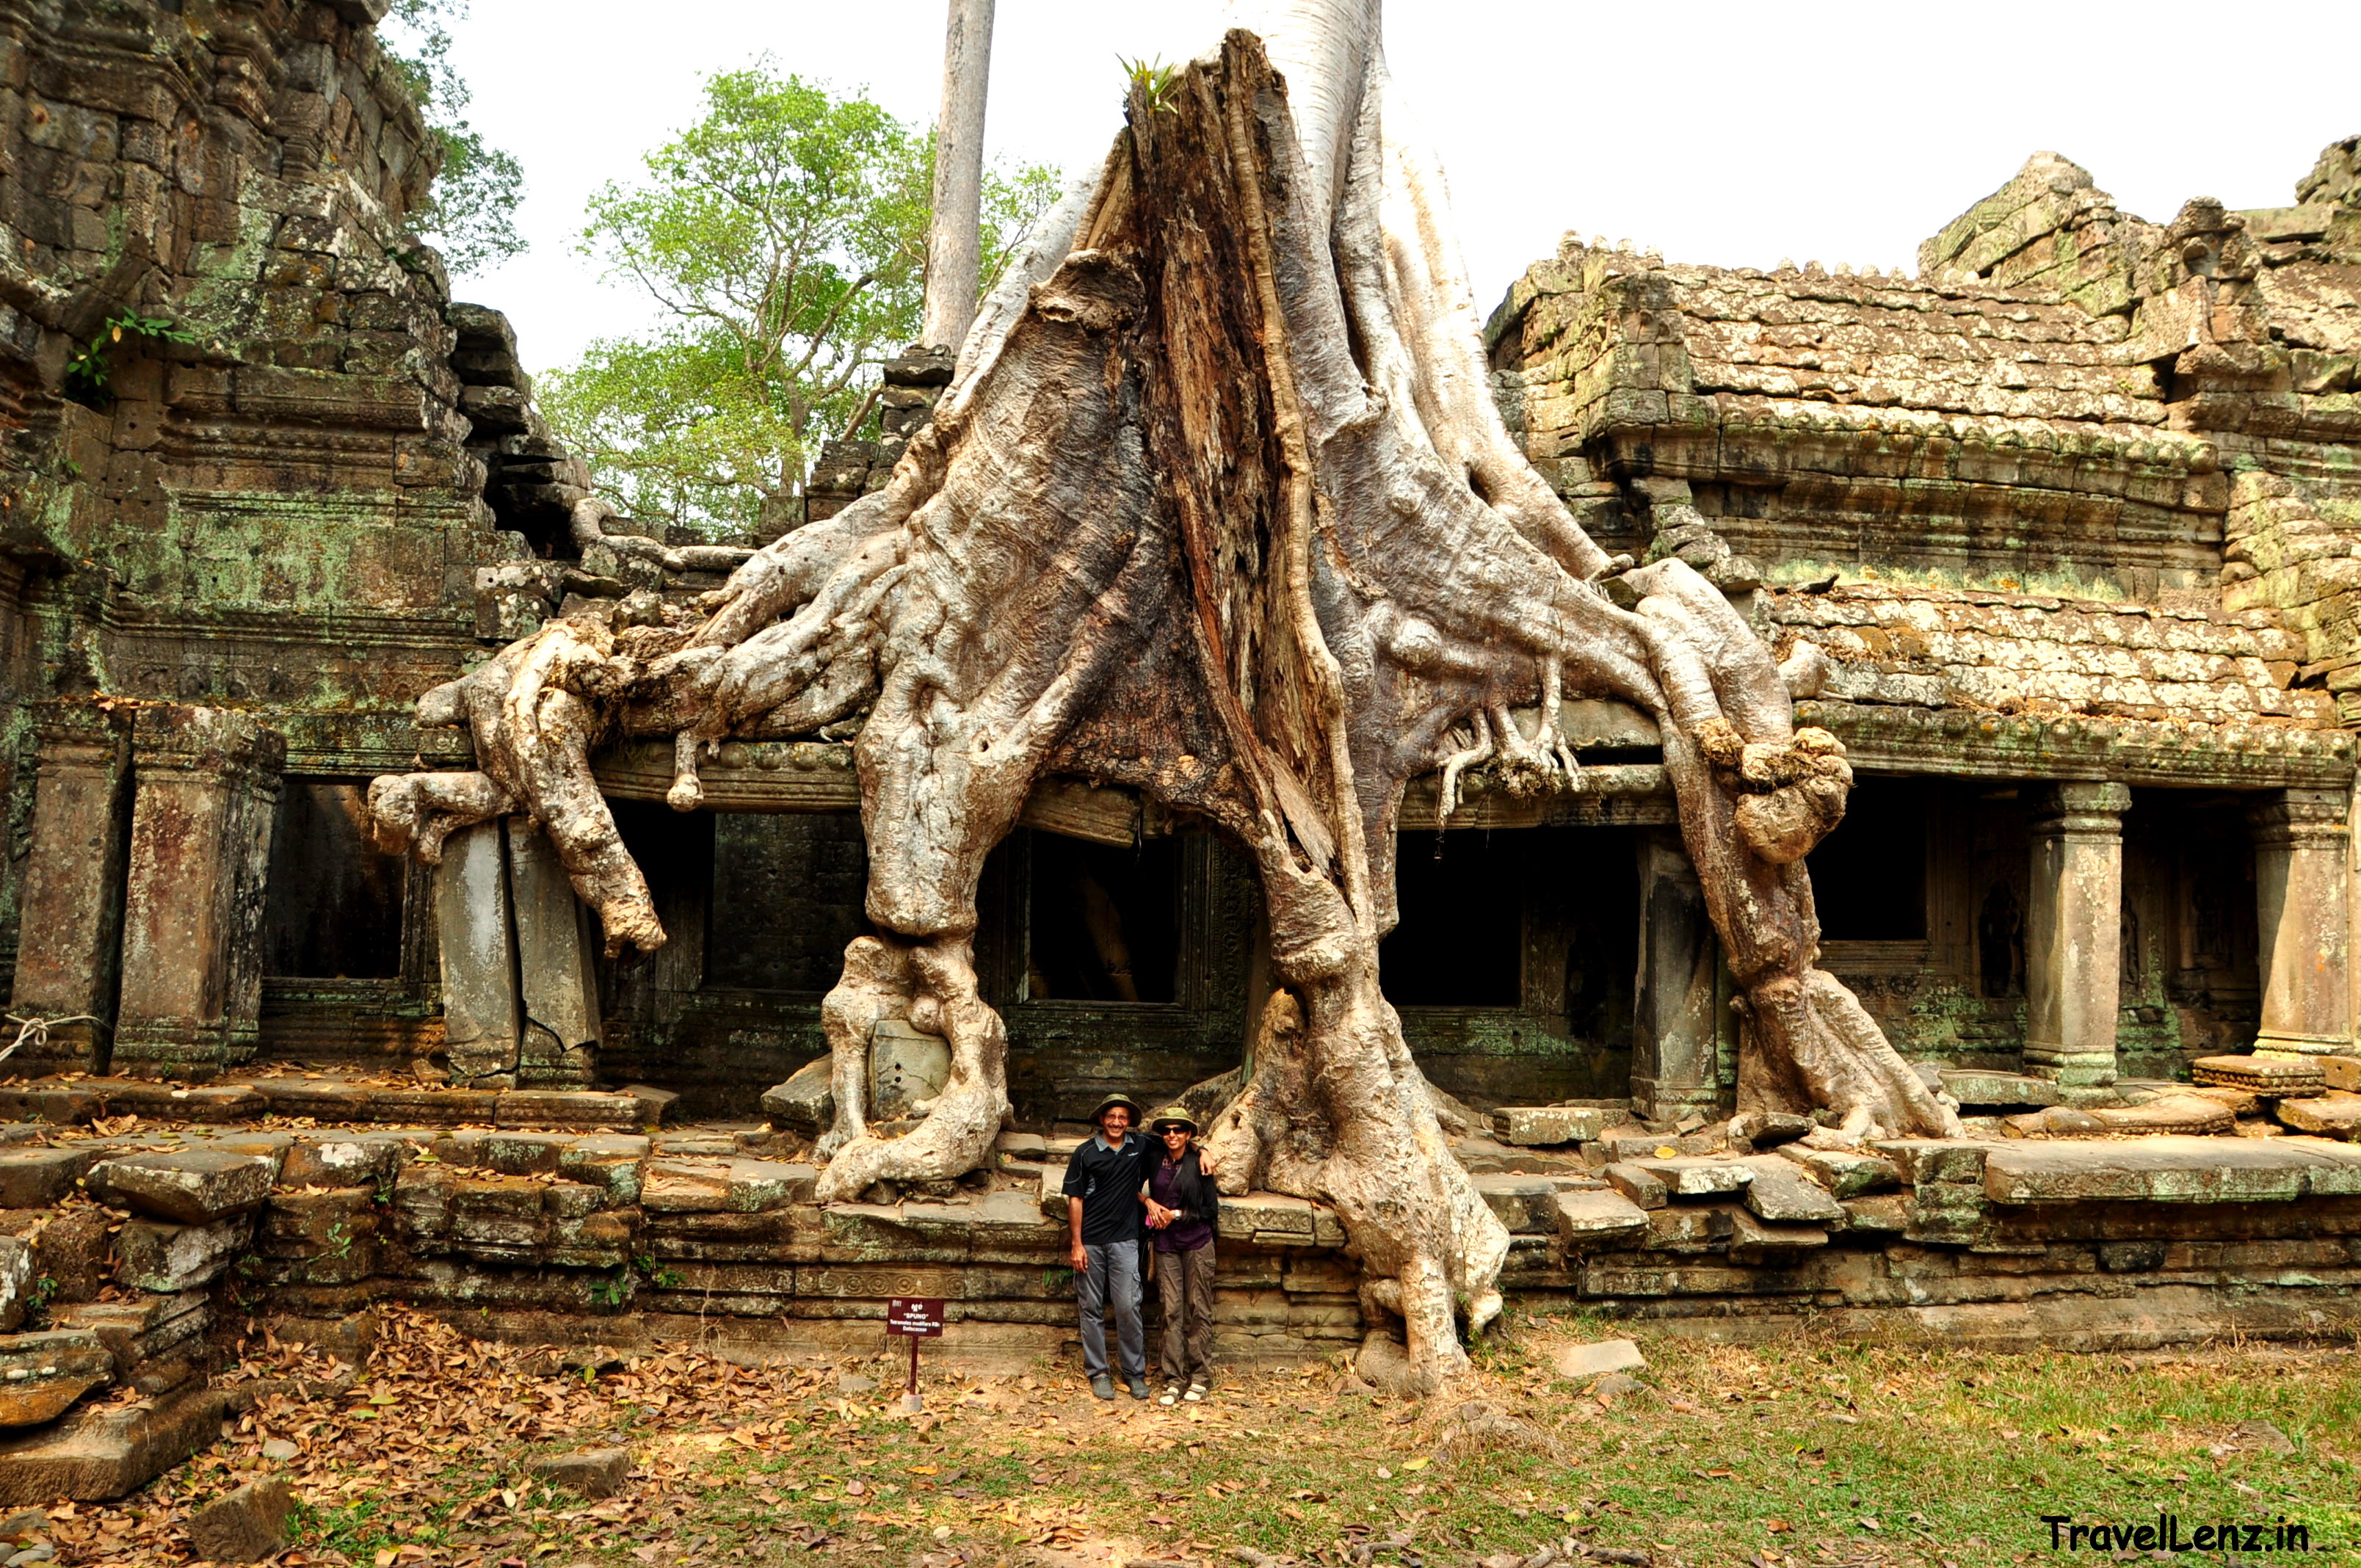 Dwarfed by the giant banyan tree roots